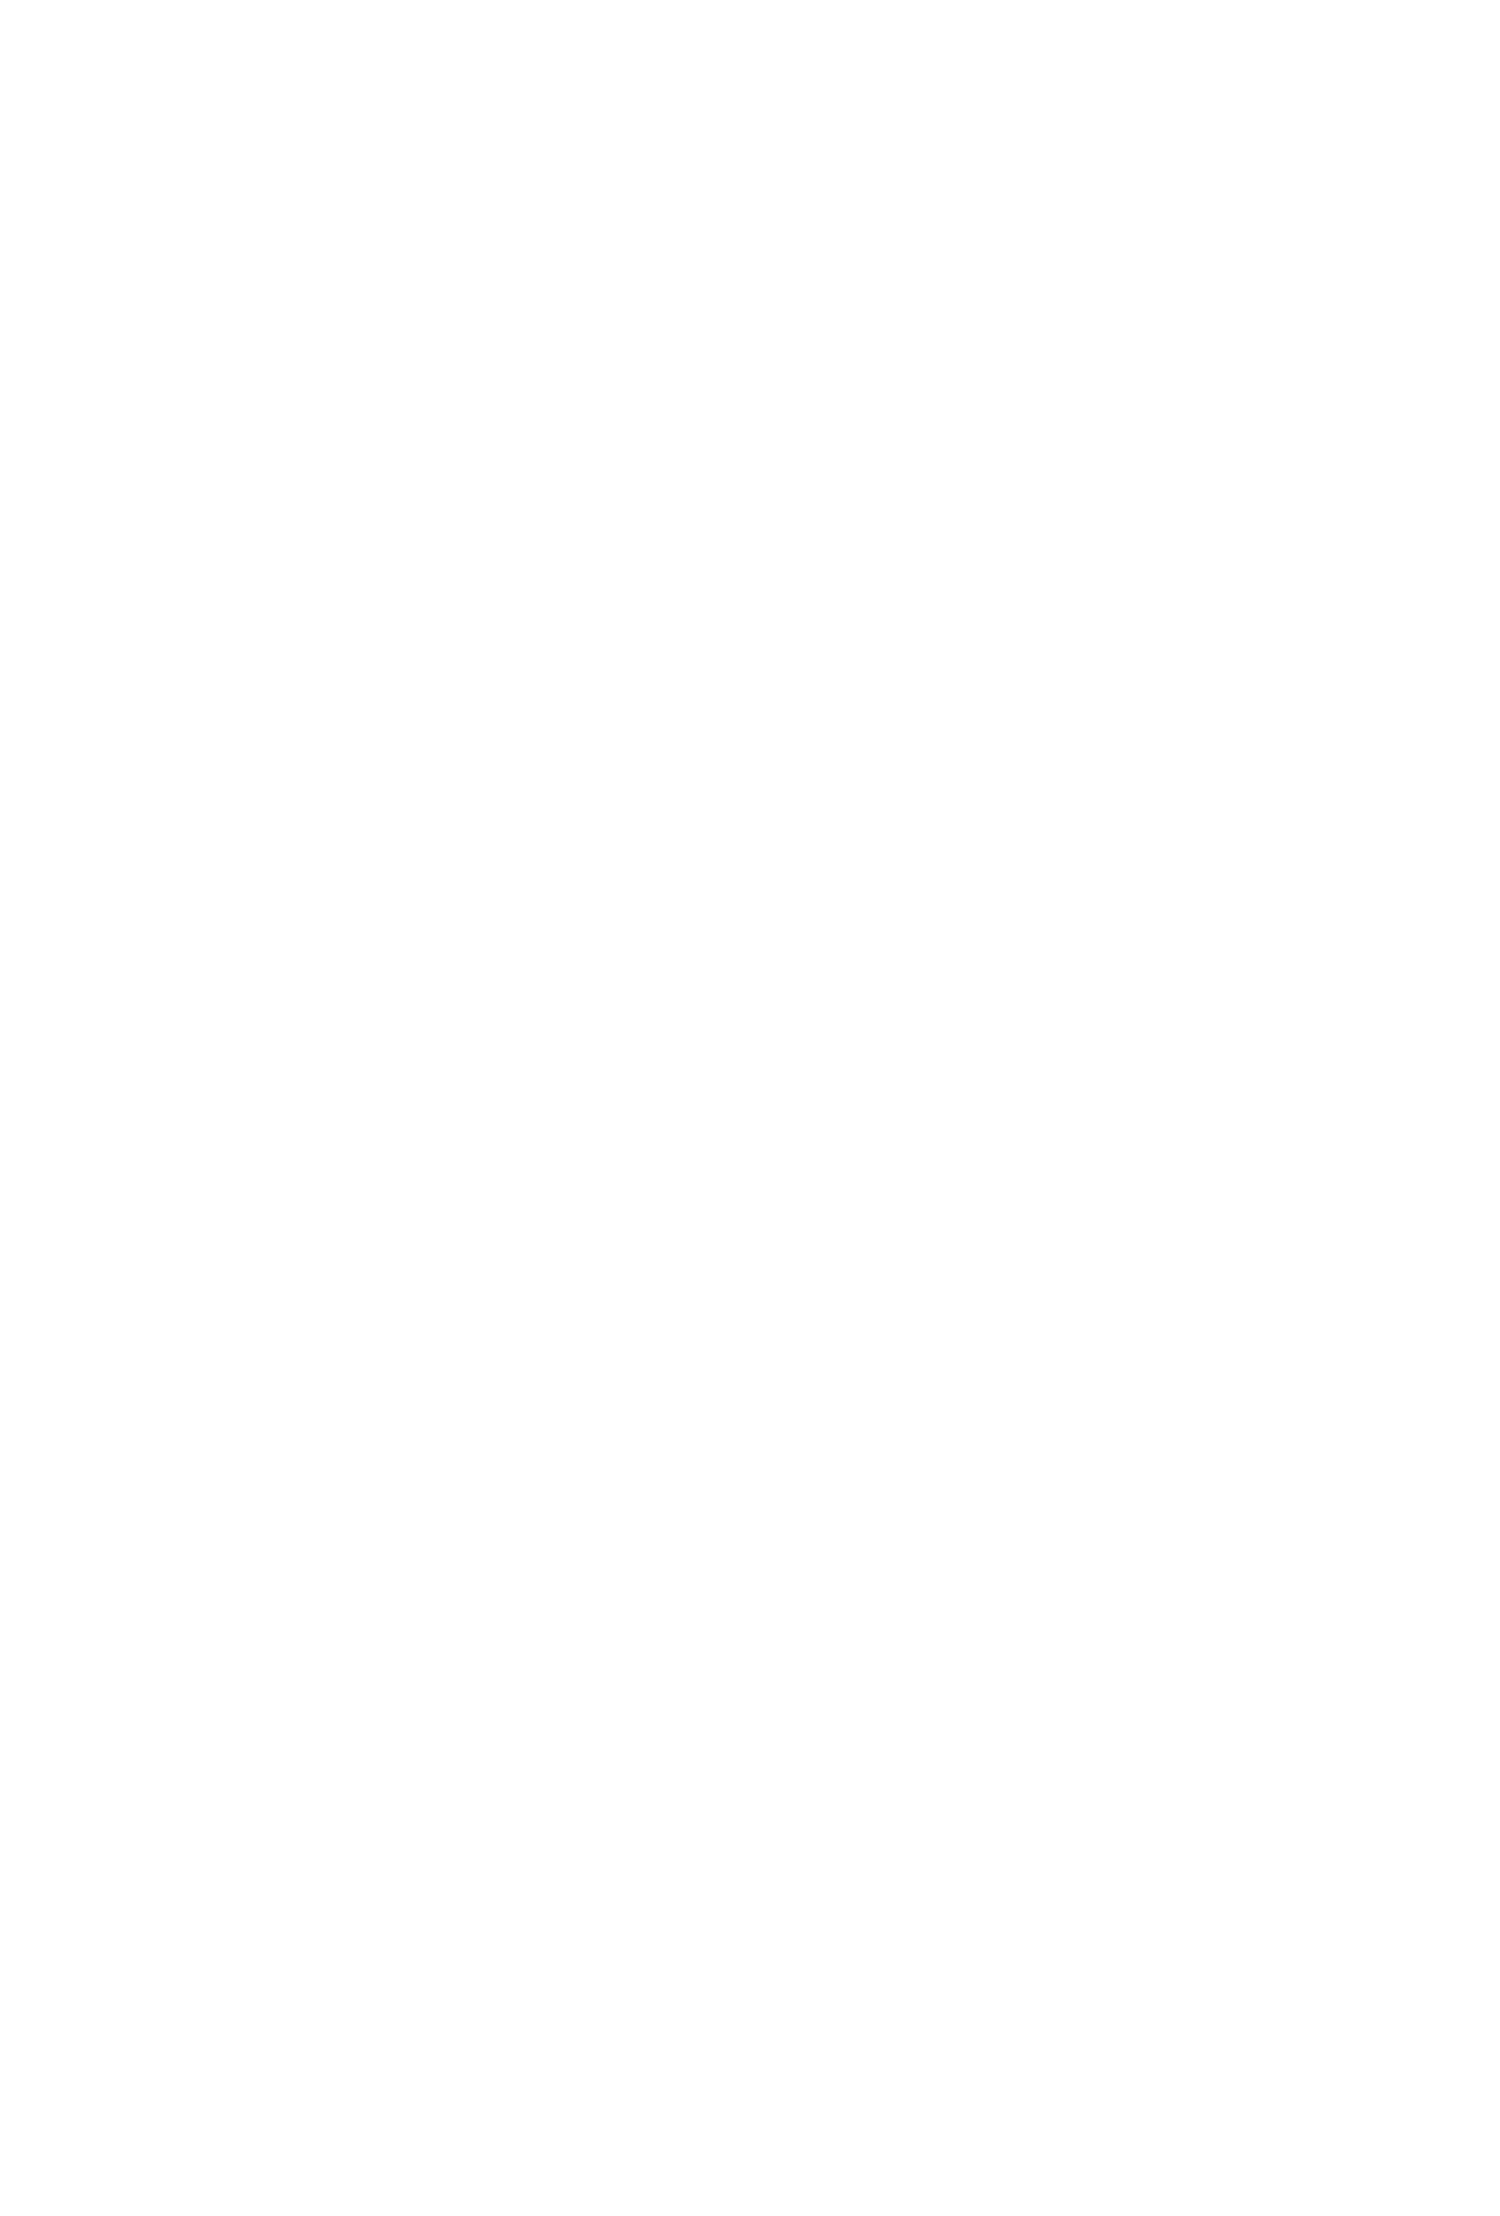 Feel Good Foods Catering